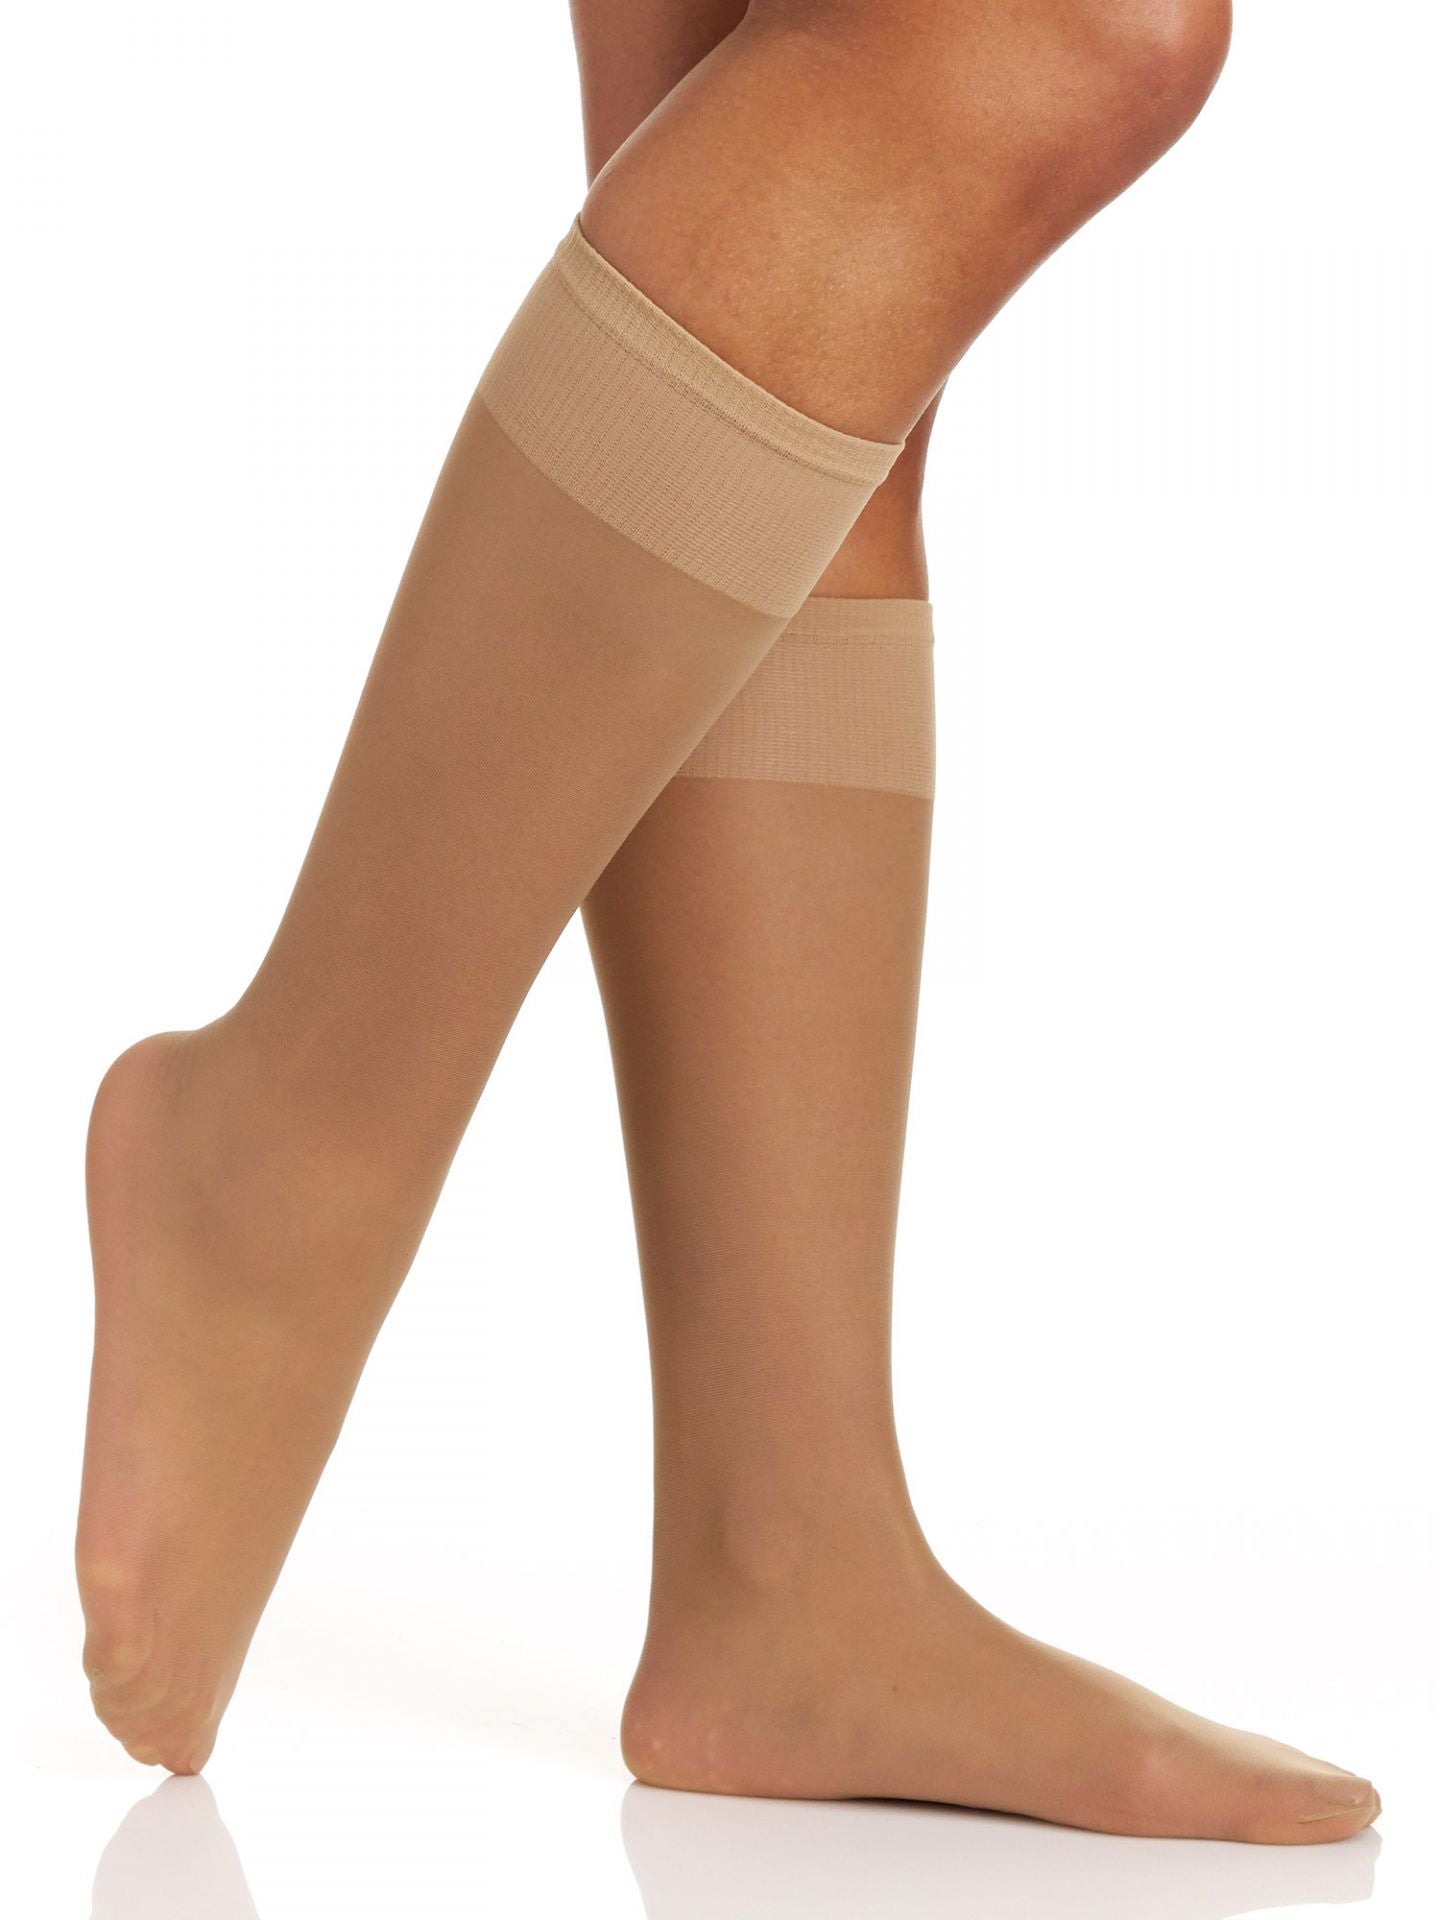 Sheer Support Knee High with Sandalfoot Toe